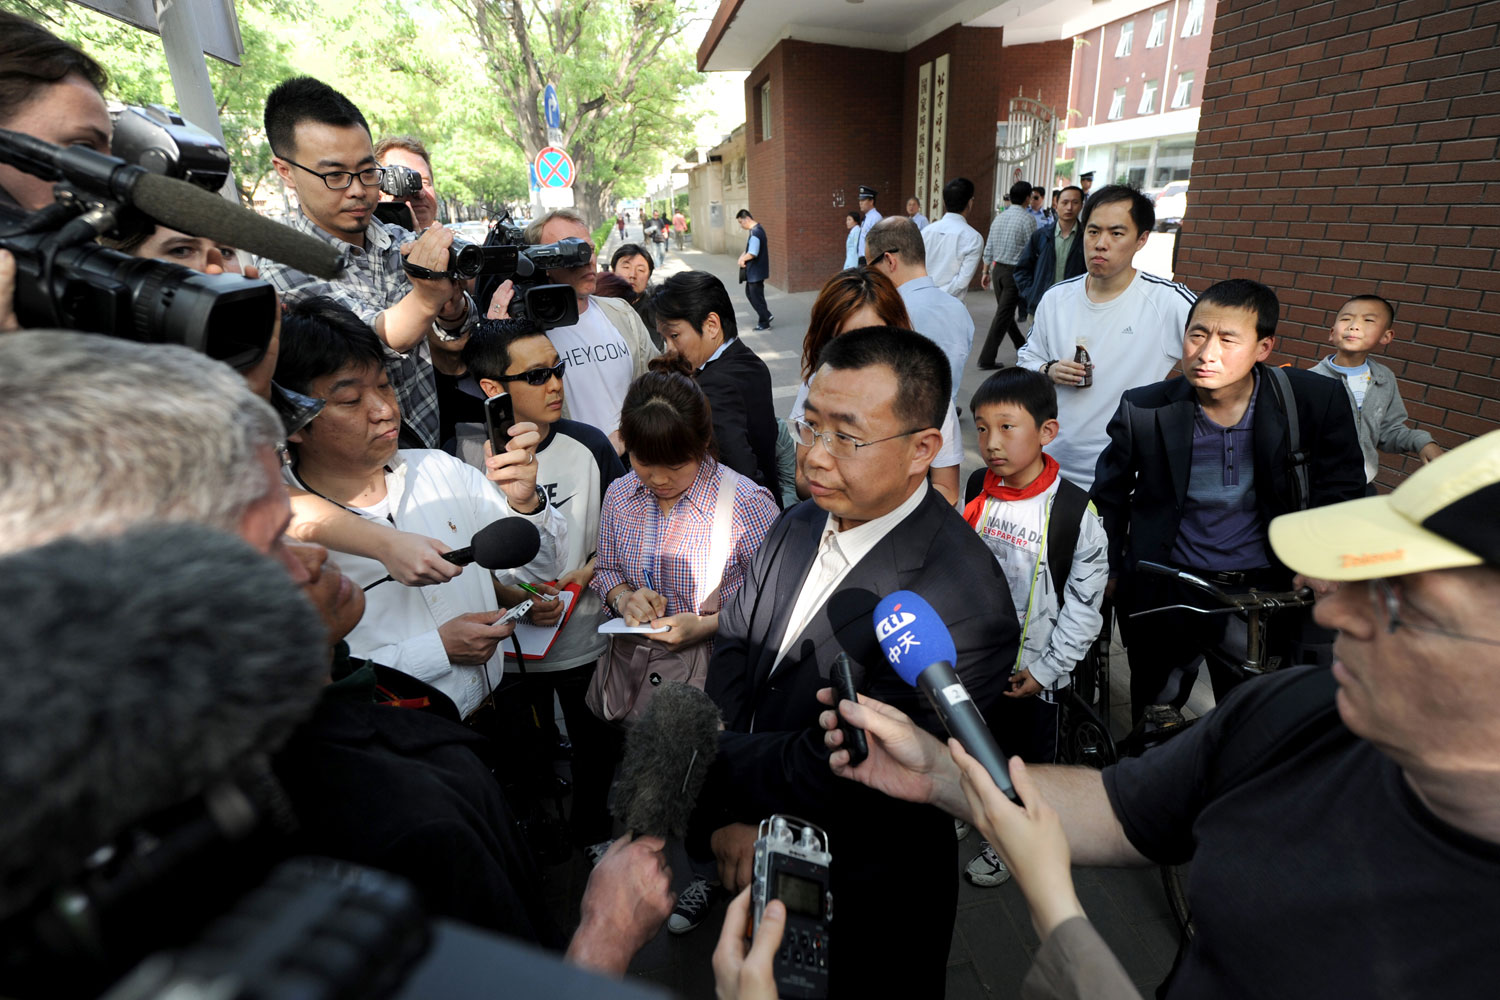 Journalists interview Chinese rights lawyer Jiang Tianyong at a gate of the Chaoyang hospital in Beijing in Beijing on May 2, 2012. (Mark Ralston—AFP/Getty Images)